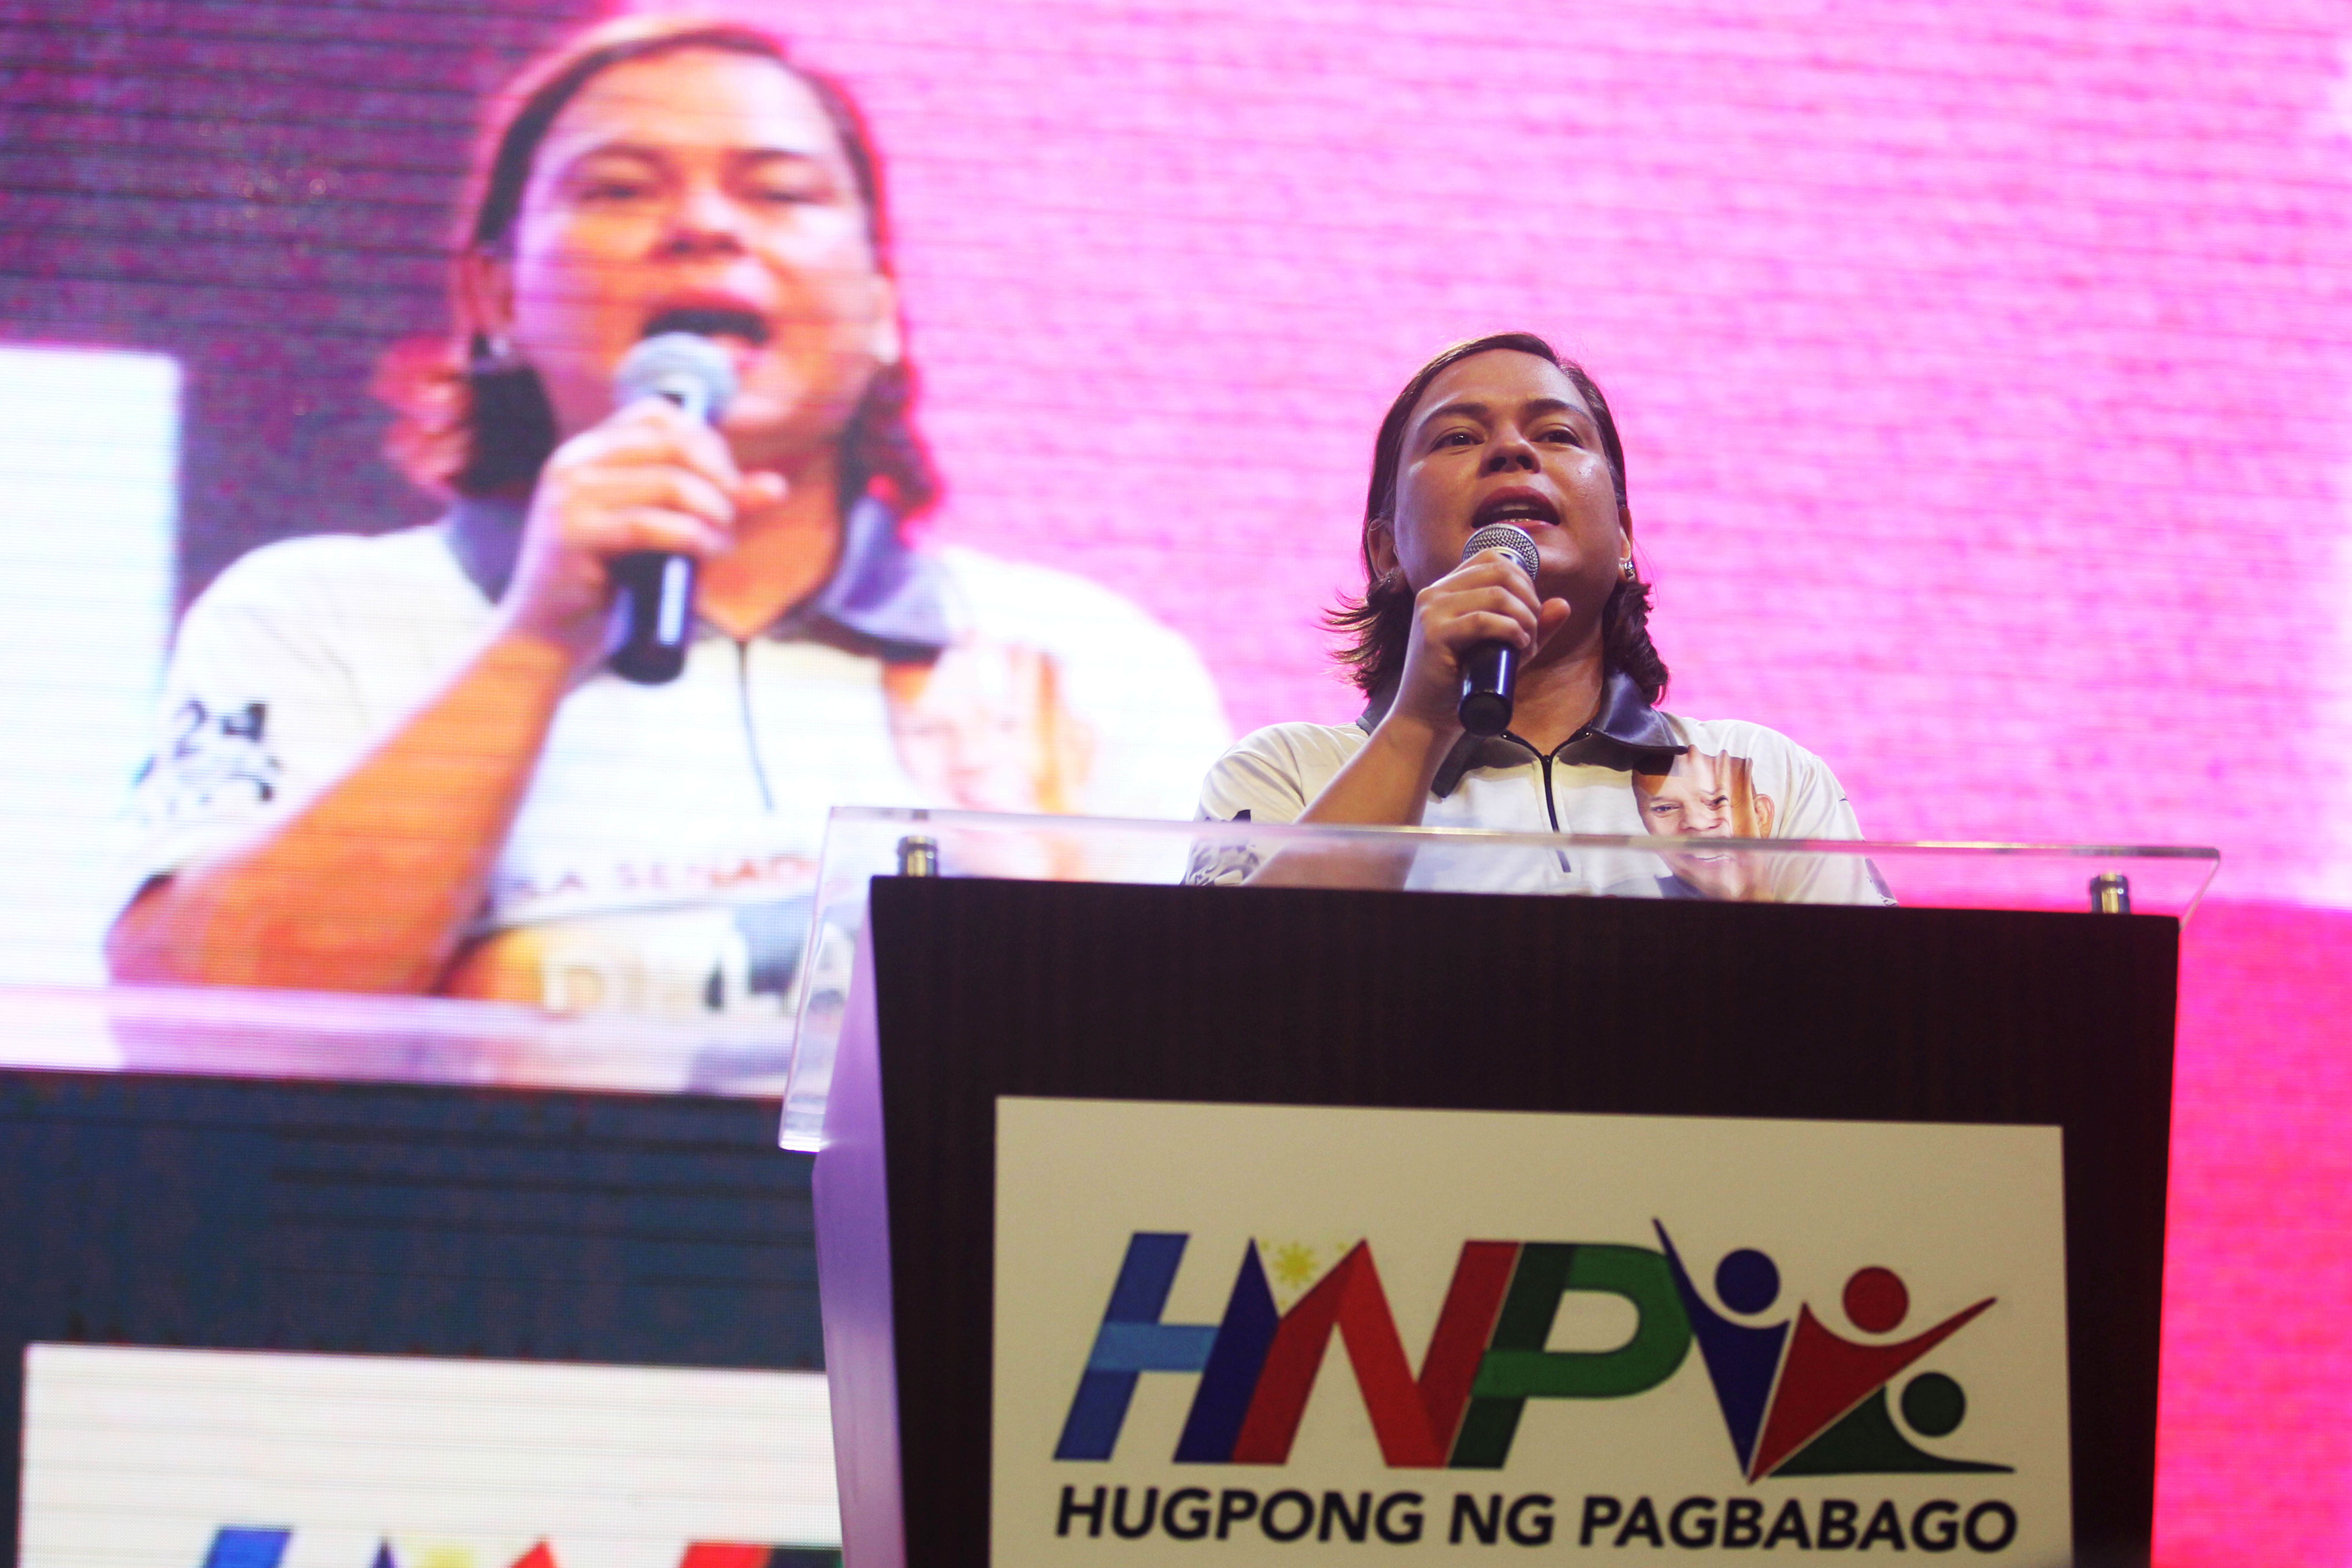 Sara Duterte, Davao City Mayor and daughter of Philippine President Rodrigo Duterte, delivers a speech during a senatorial campaign caravan for Hugpong Ng Pagbabago (HNP) in Davao City, southern Philippines on May 9, 2019. HNP is a regional political party chaired by Sara Duterte. Picture taken May 9, 2019. REUTERS/Lean Daval Jr/File Photo